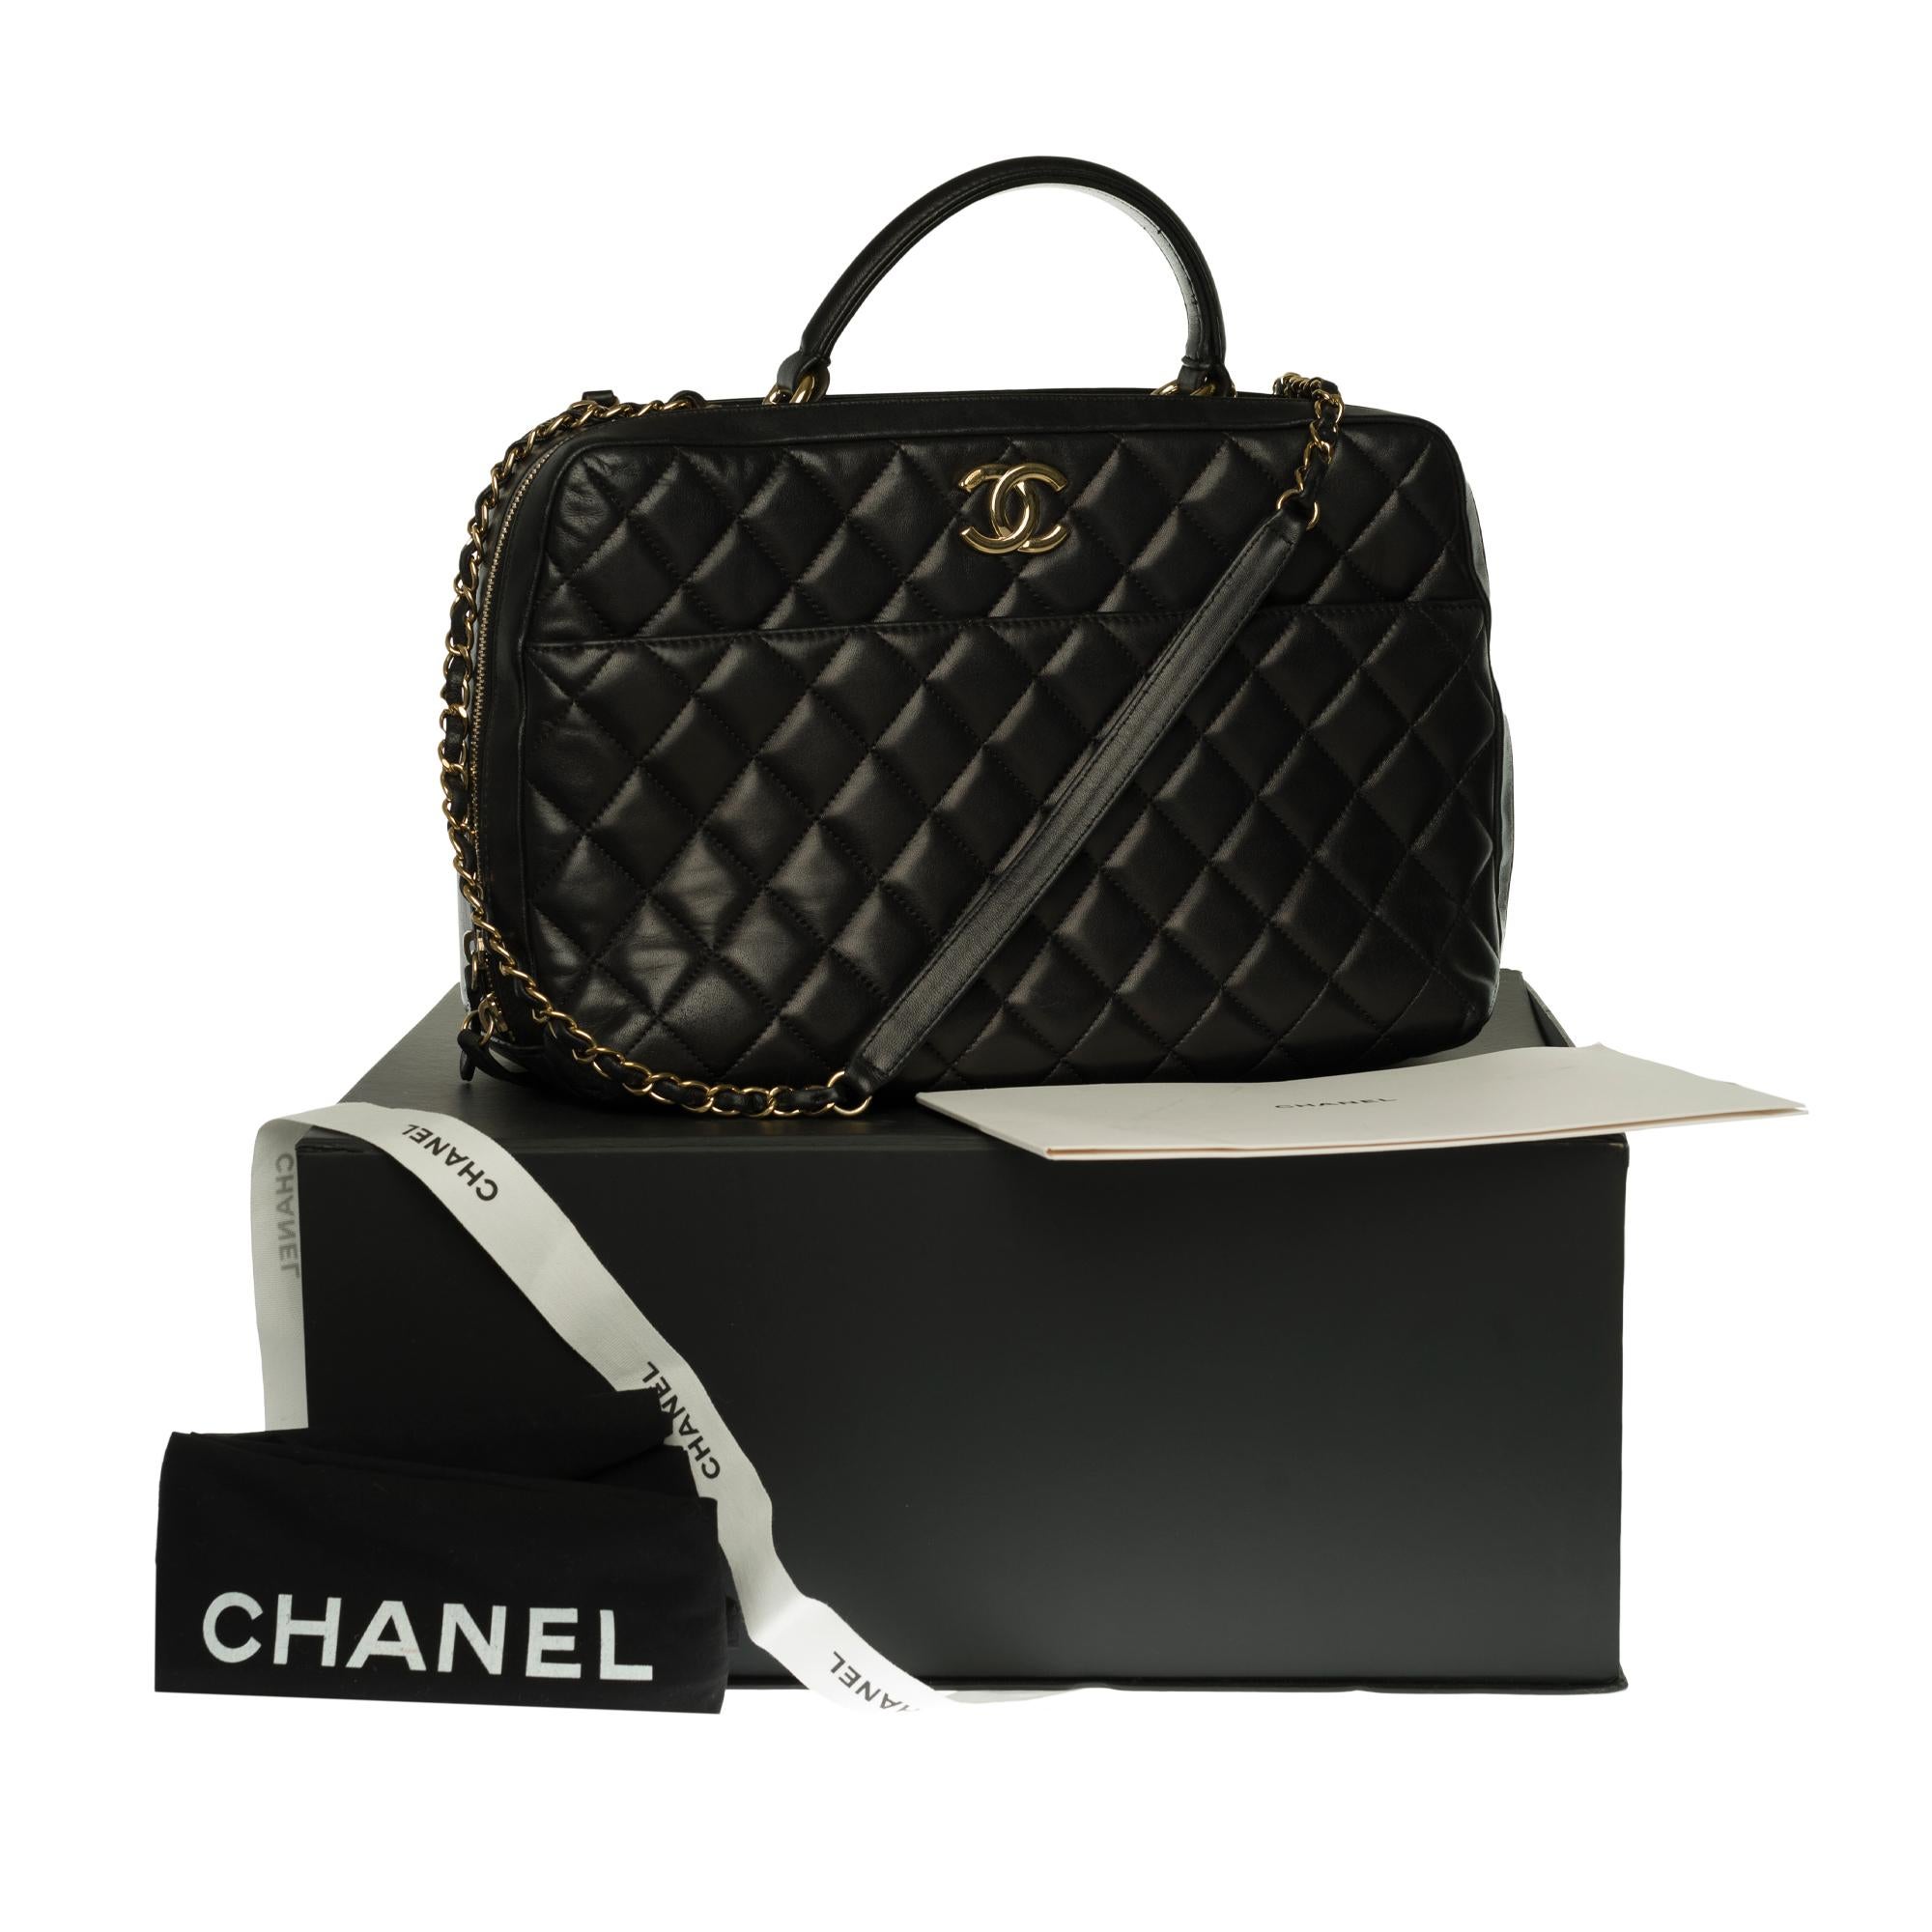 Chanel CC Vanity Case Bag. 
This new vanity case is part of Chanel’s Fall/Winter 2018 Act 2 Collection. The bag is made of calfskin and comes with a gold-tone metal hardware. It features the interlocking CC logo with a top handle. It also includes a